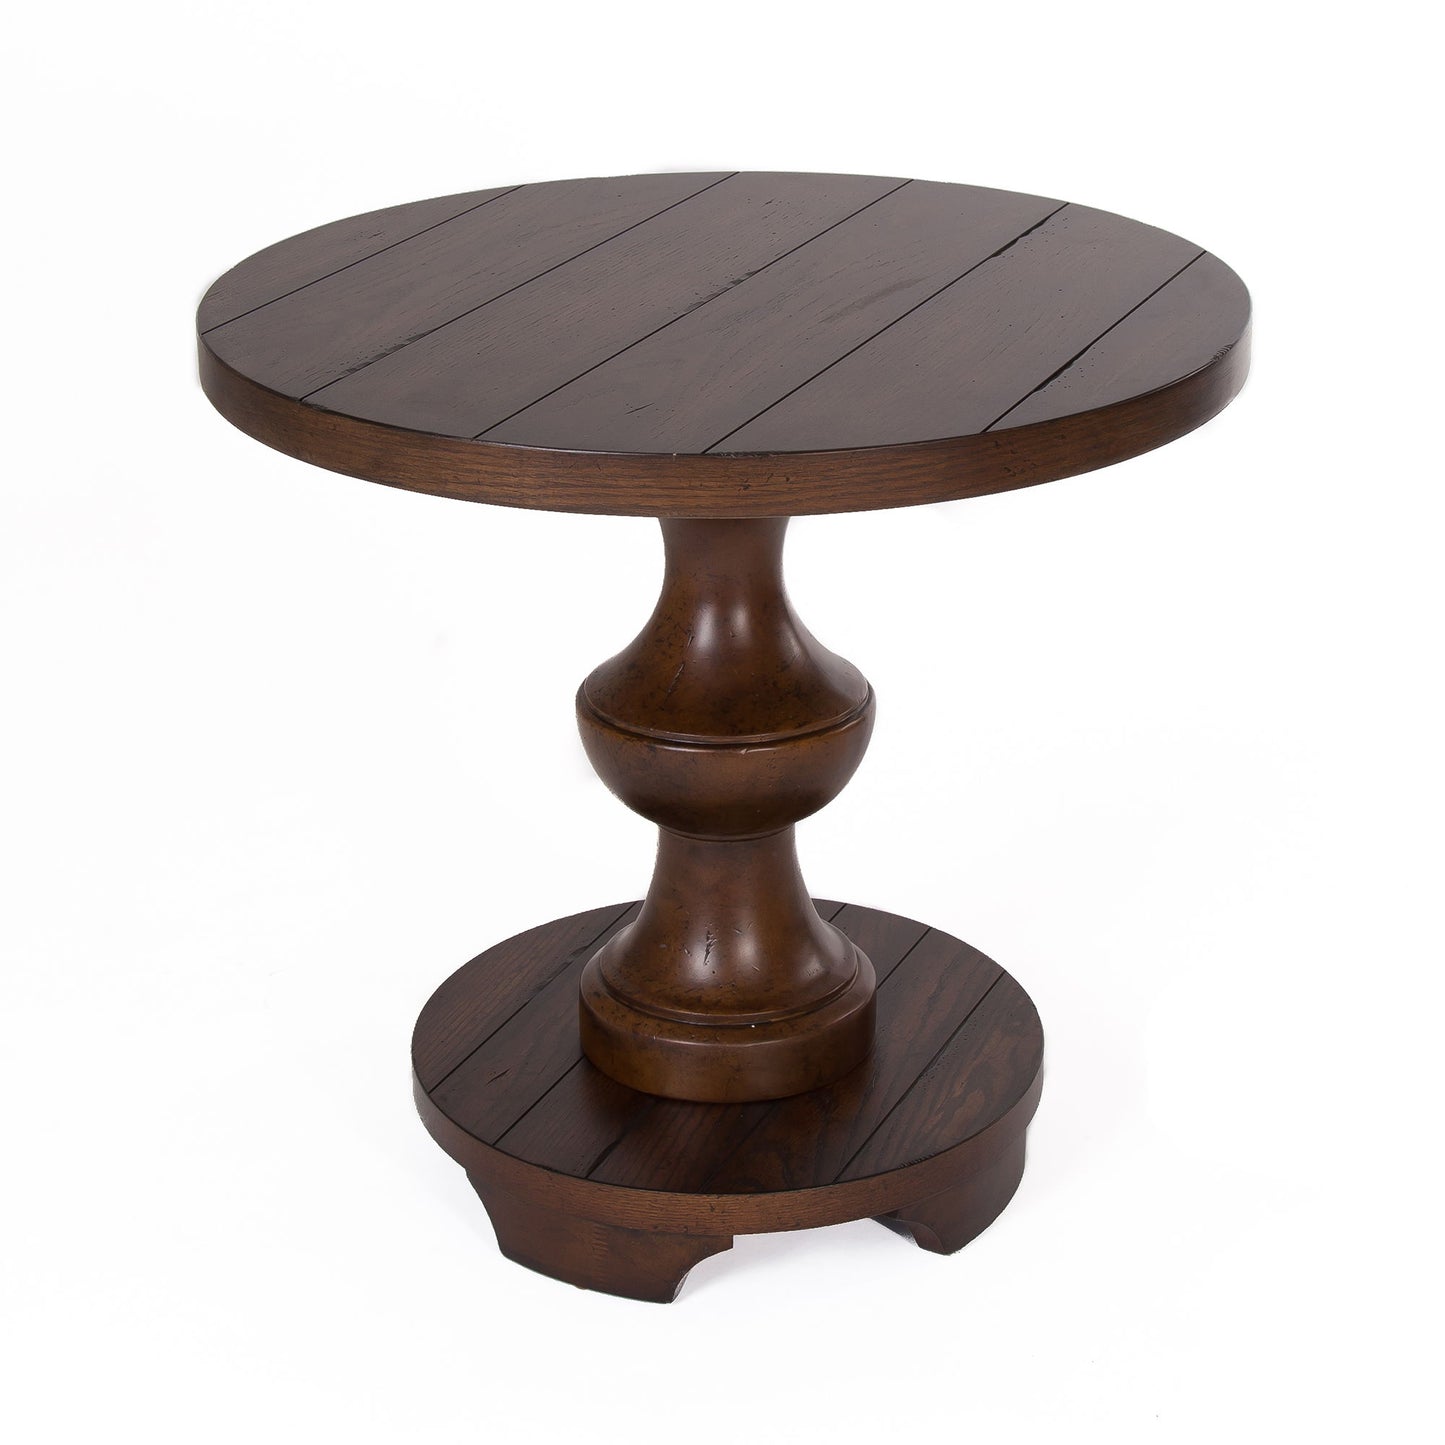 Sedona - 3 Piece Table Set (1-Cocktail 2-End Tables) - Dark Brown